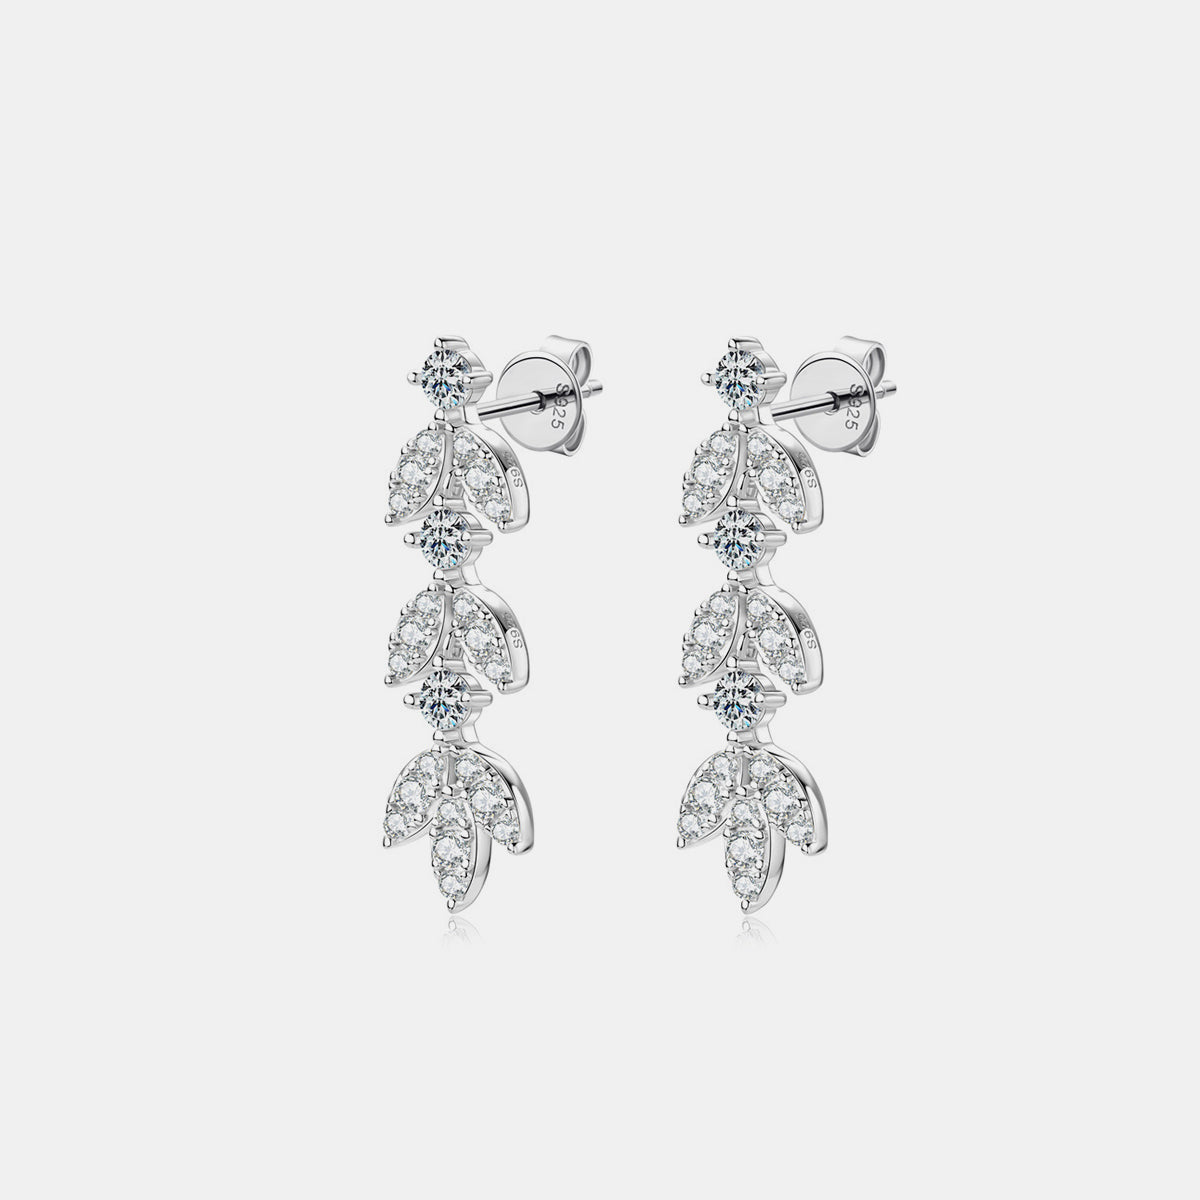 Close-up of a woman wearing elegant sterling silver leaf-shaped earrings, reflecting a subtle sparkle.